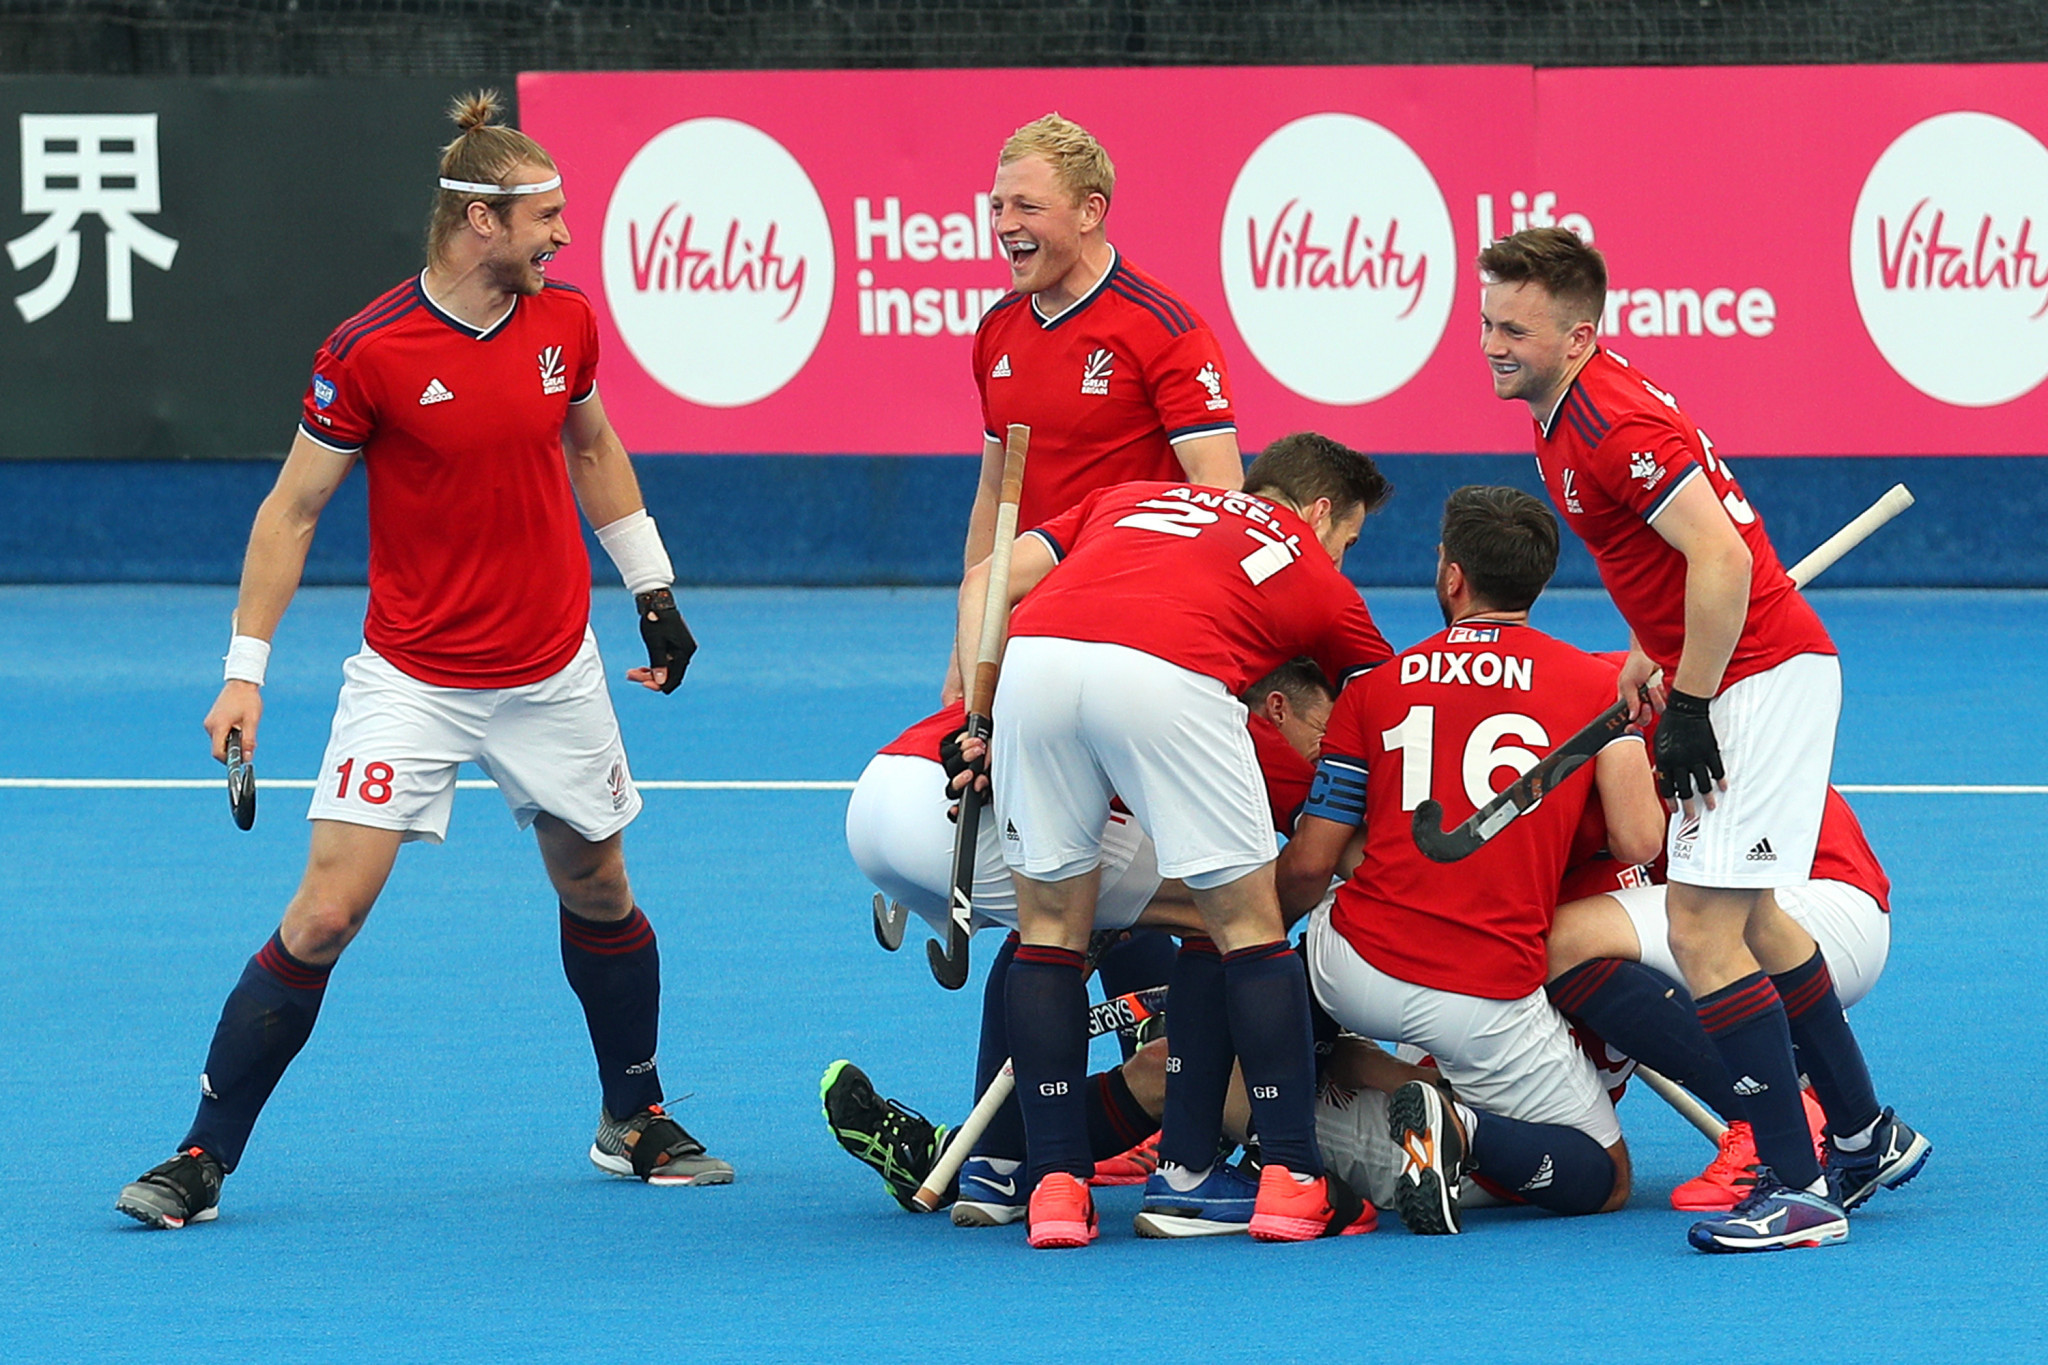 Bottom-of-the-table Britain stun Germany in men's Hockey Pro League